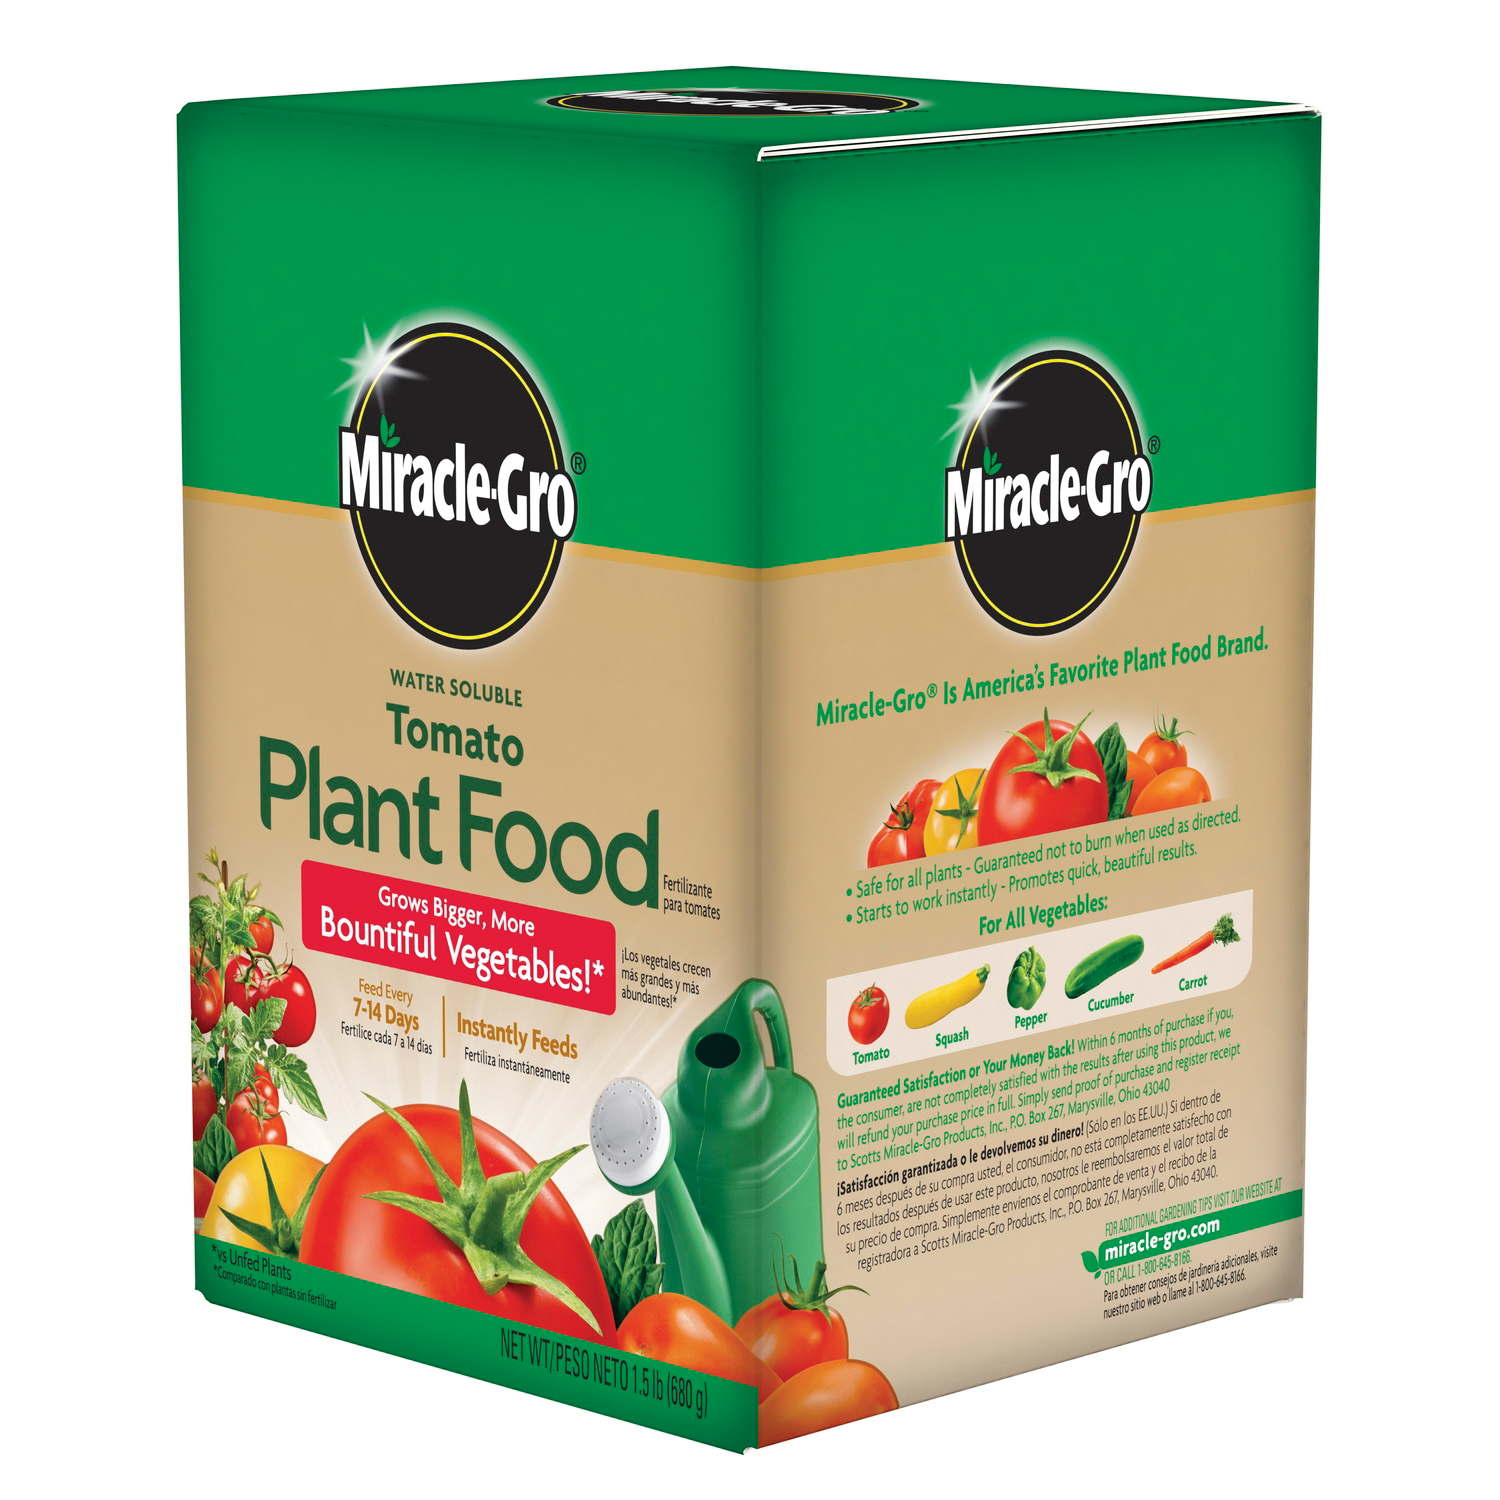 Miracle-Gro 2000422 Plant Food, 1.5 lb Box, Solid, 18-18-21 N-P-K Ratio - 2